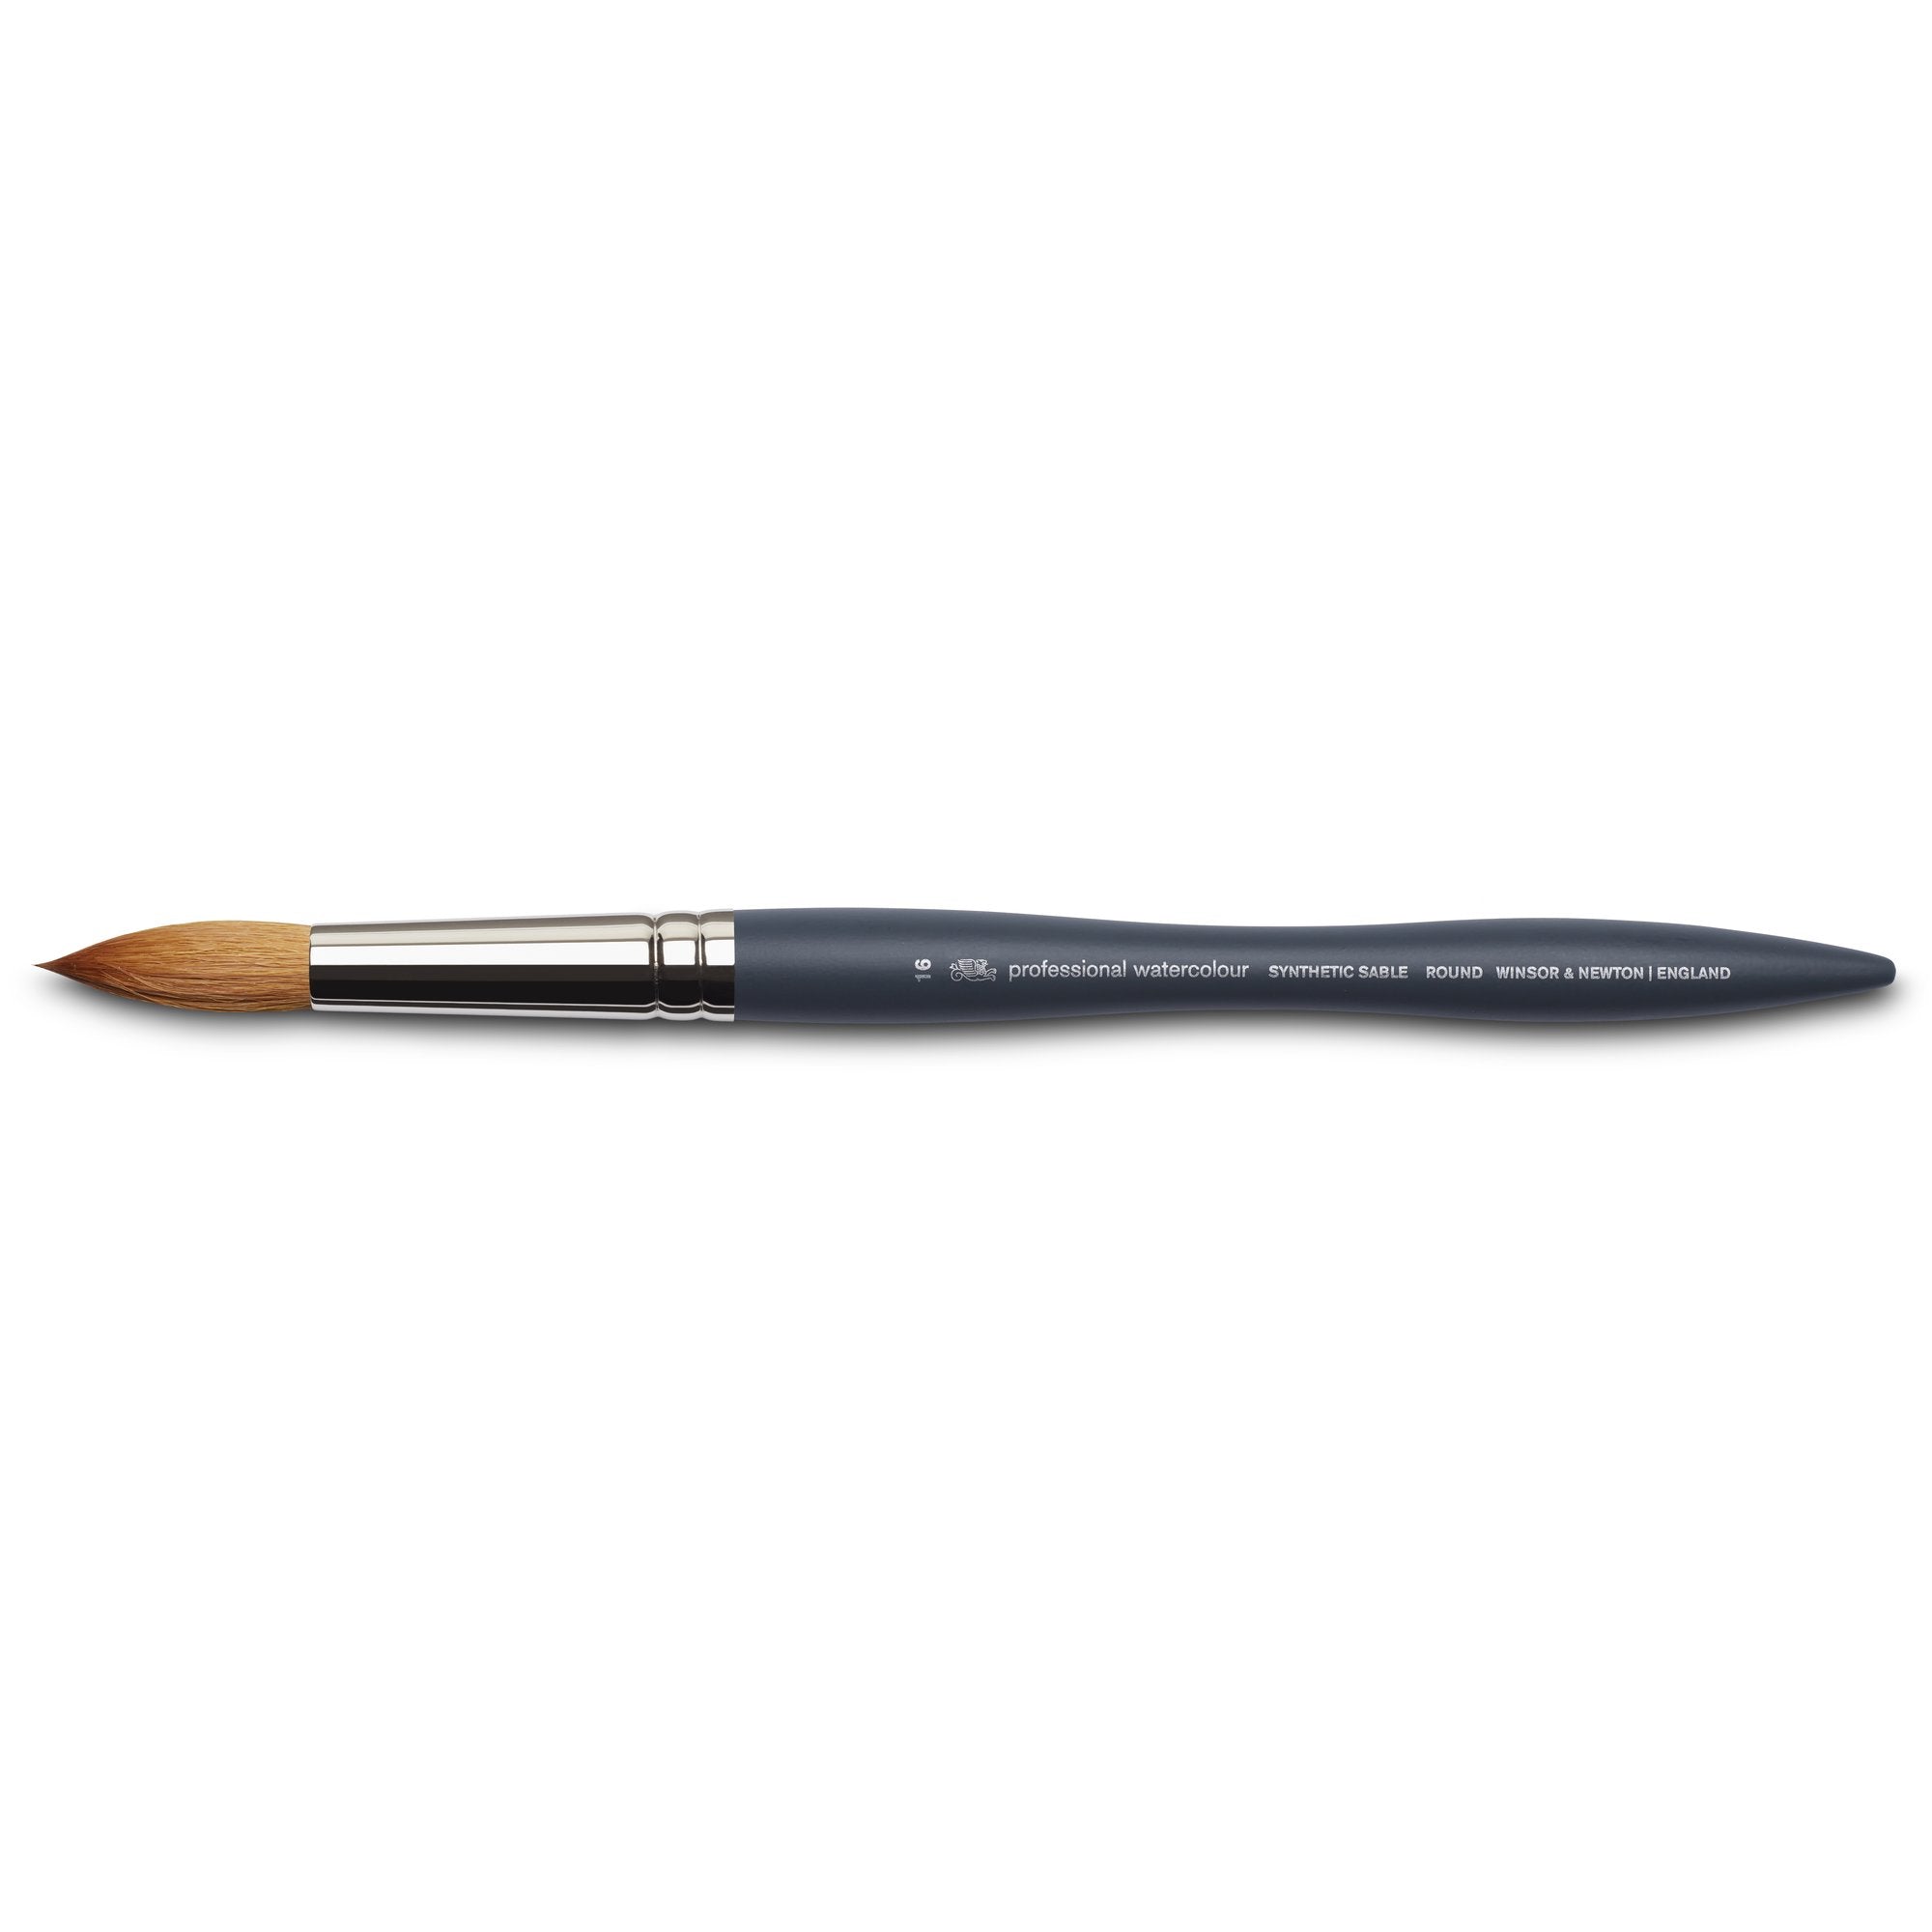 Winsor & Newton Professional Watercolour Synthetic Sable Brush Round 16